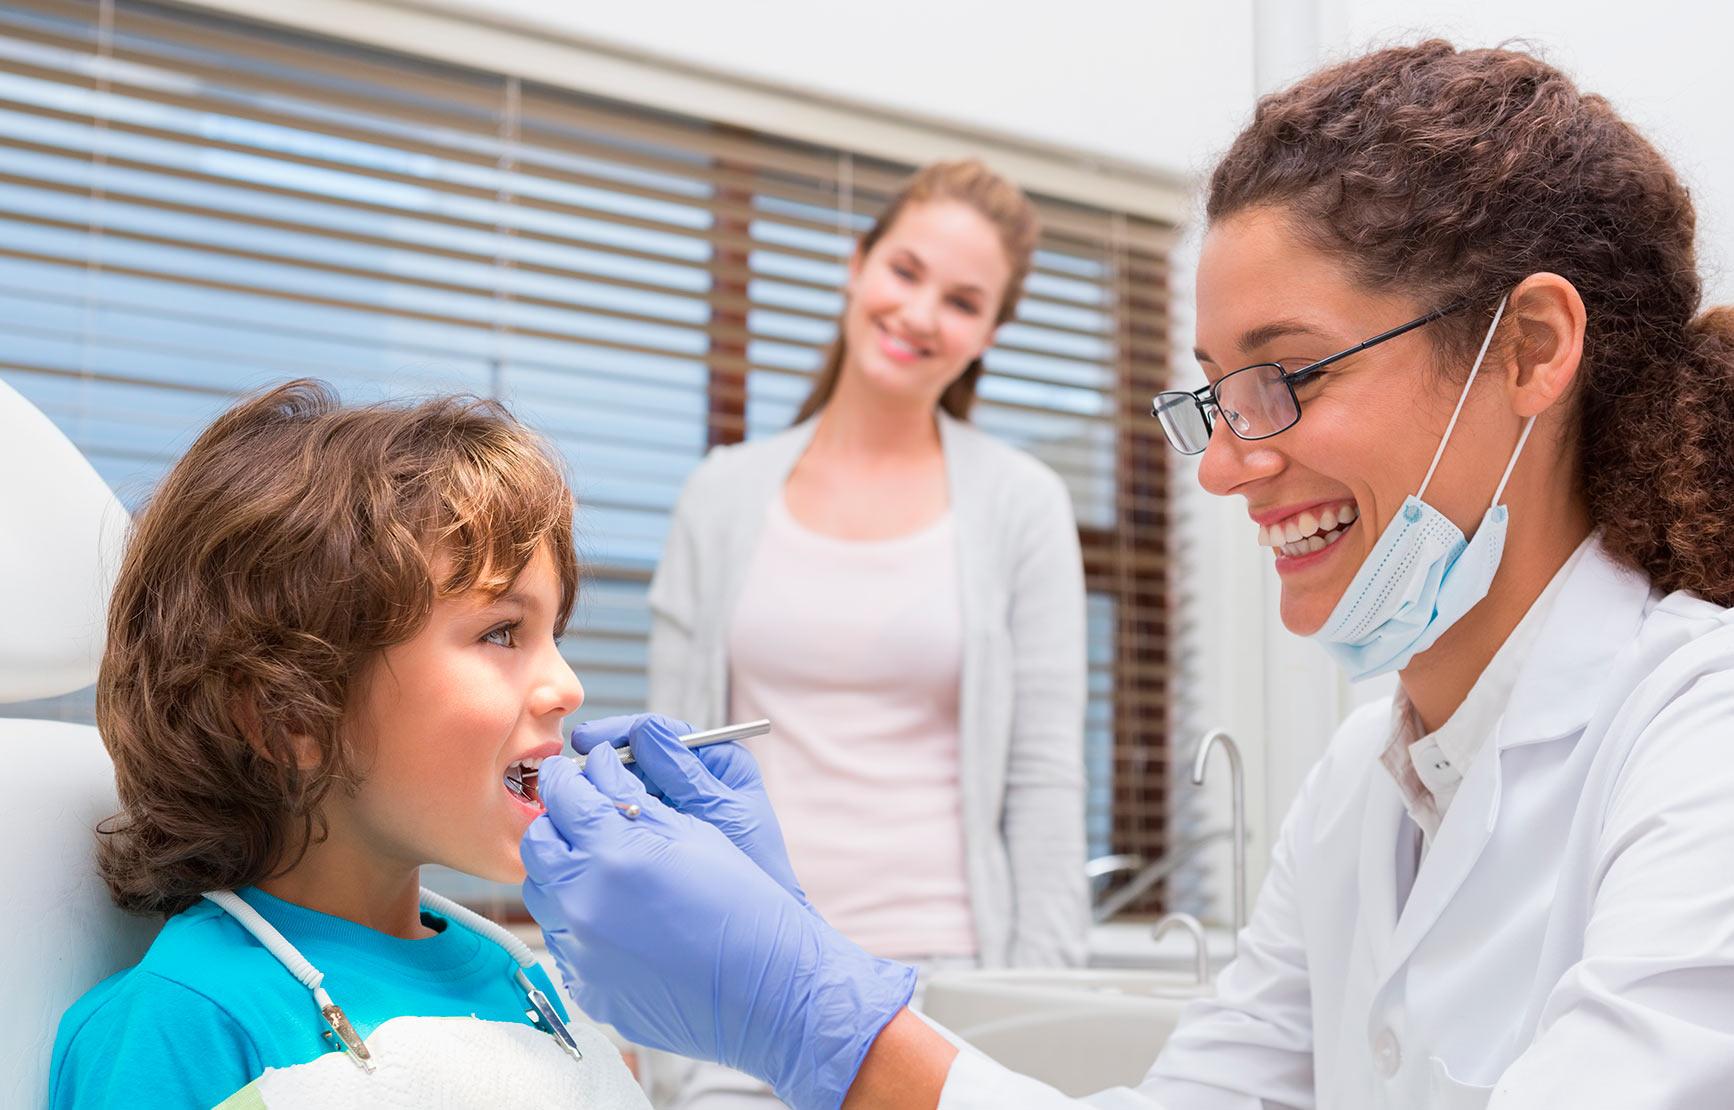 Dentist working on child's mouth next to mother